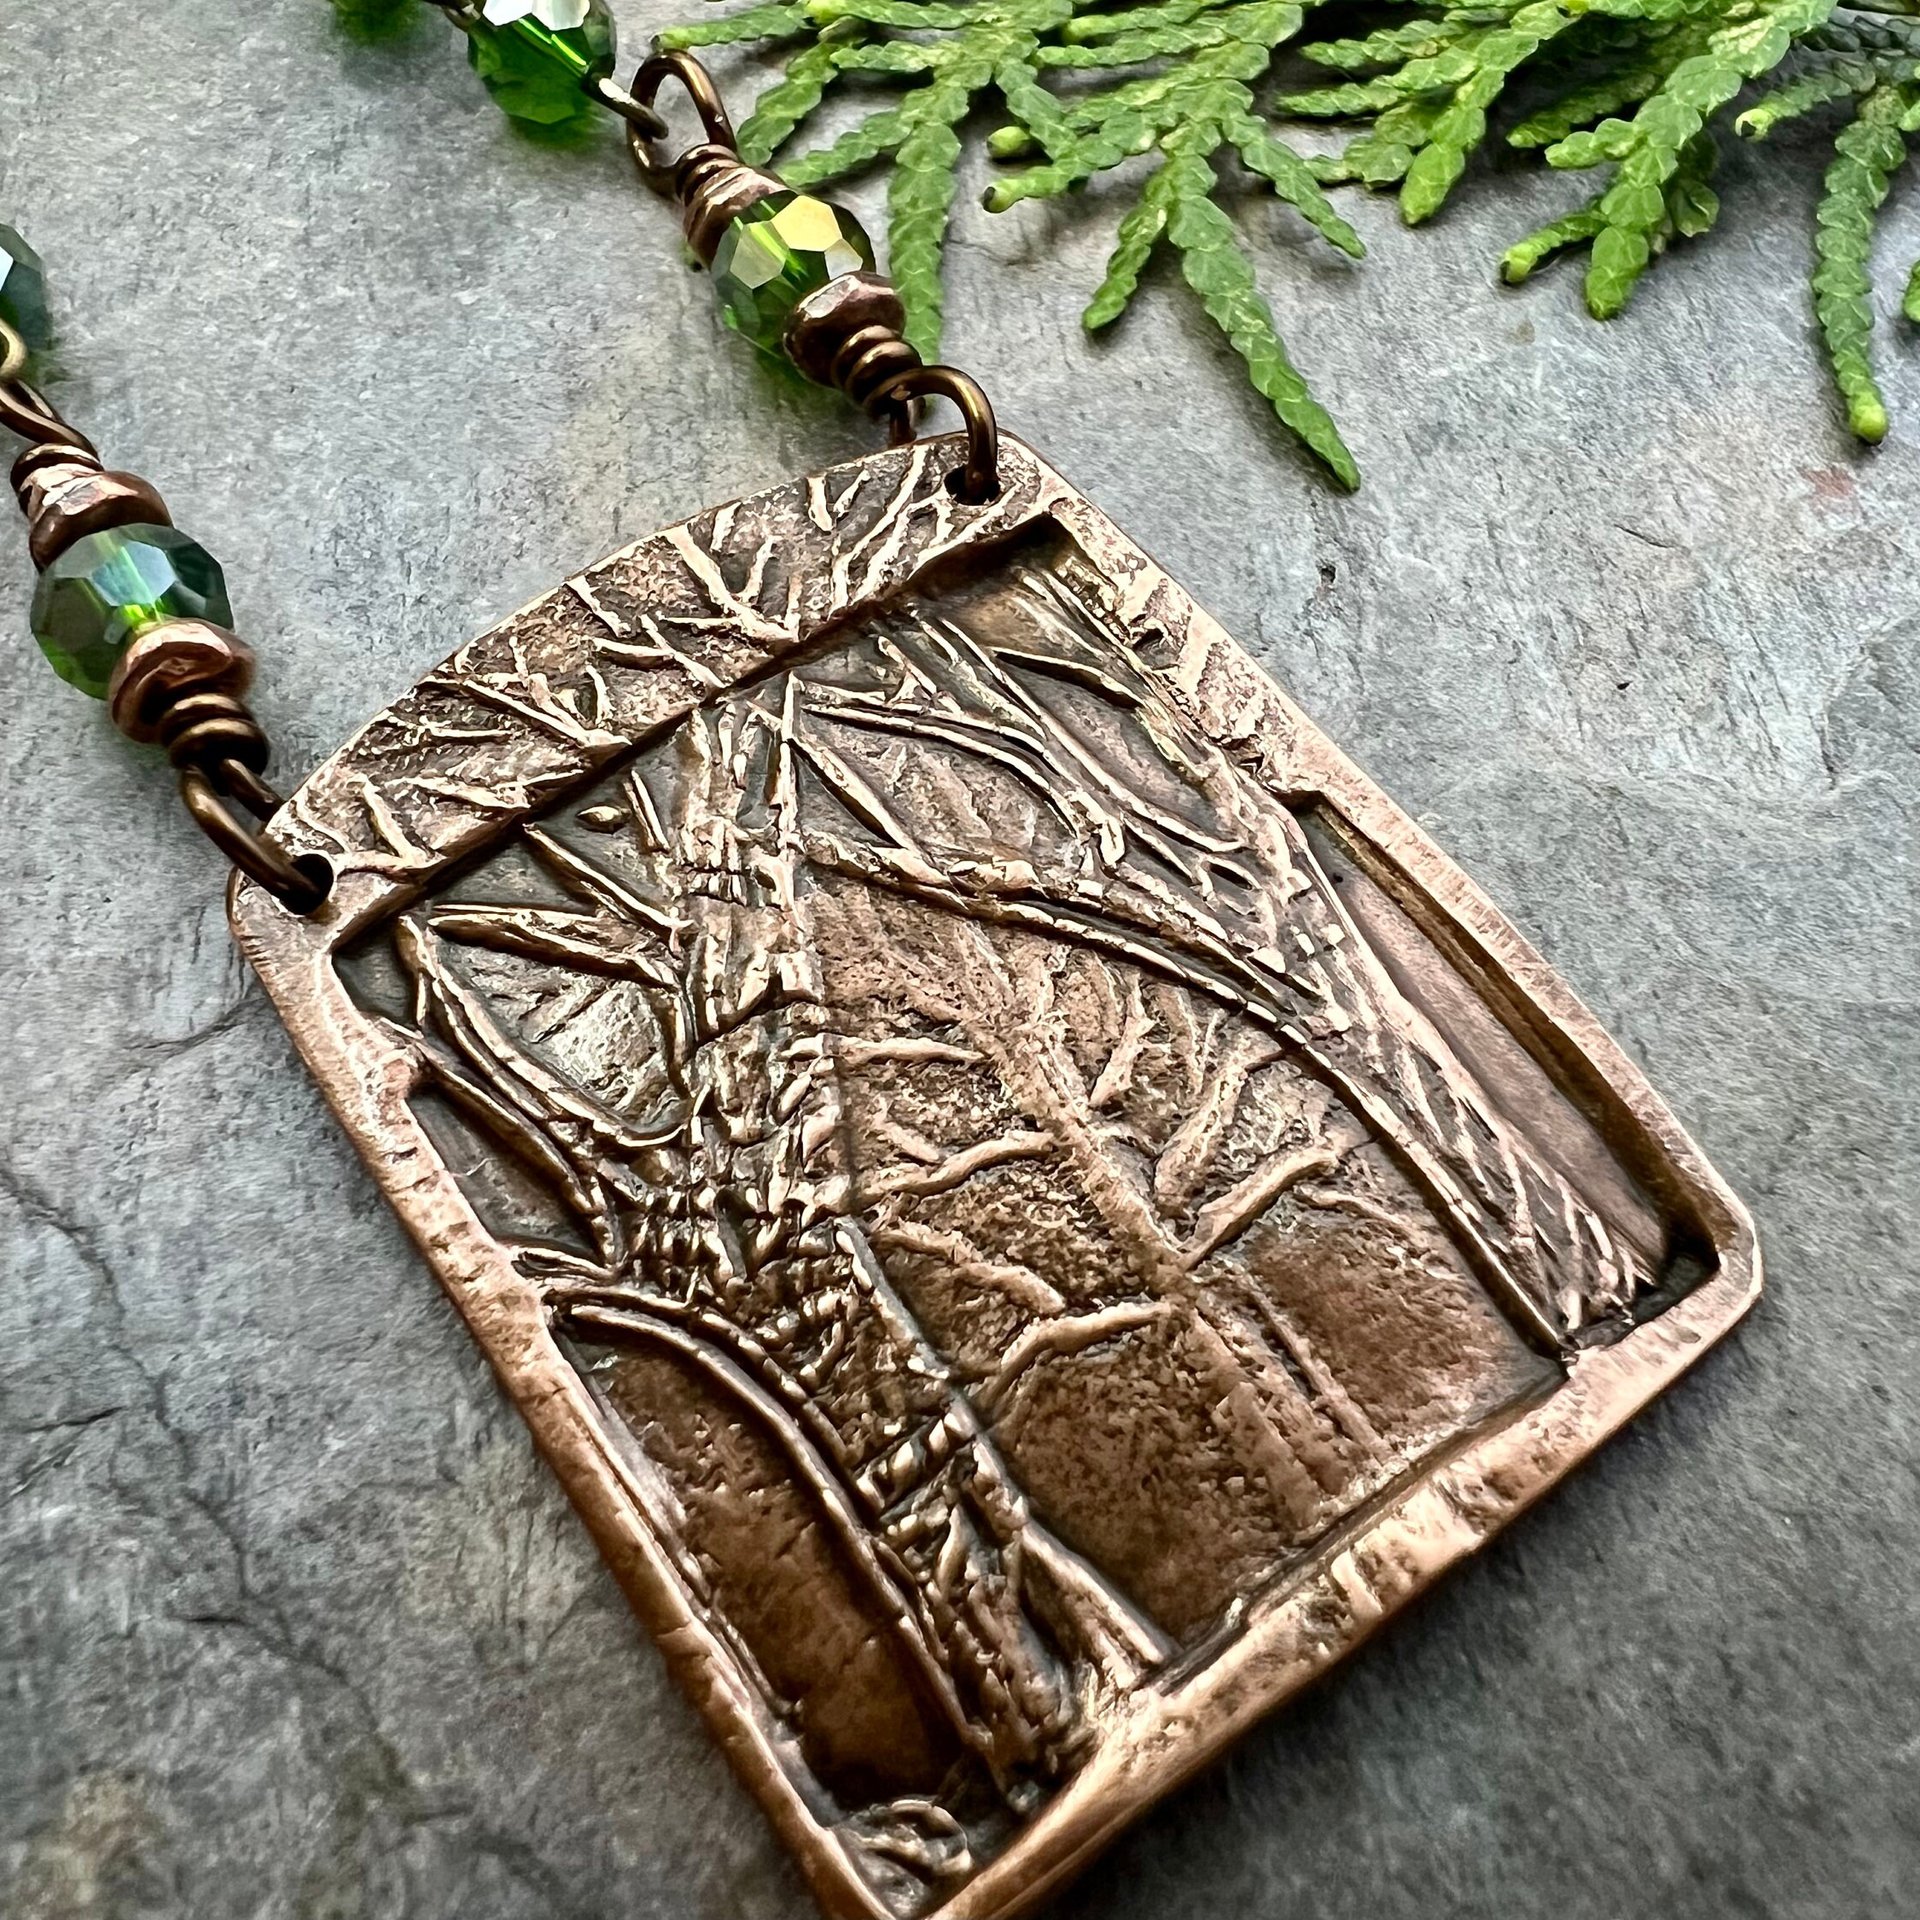 Into The Woods, Copper Tree Necklace, Green Crystal Beads, Rosary Style Beads, Celtic Green Witch, Forest Woodland Jewelry, Pagan Druid Gift